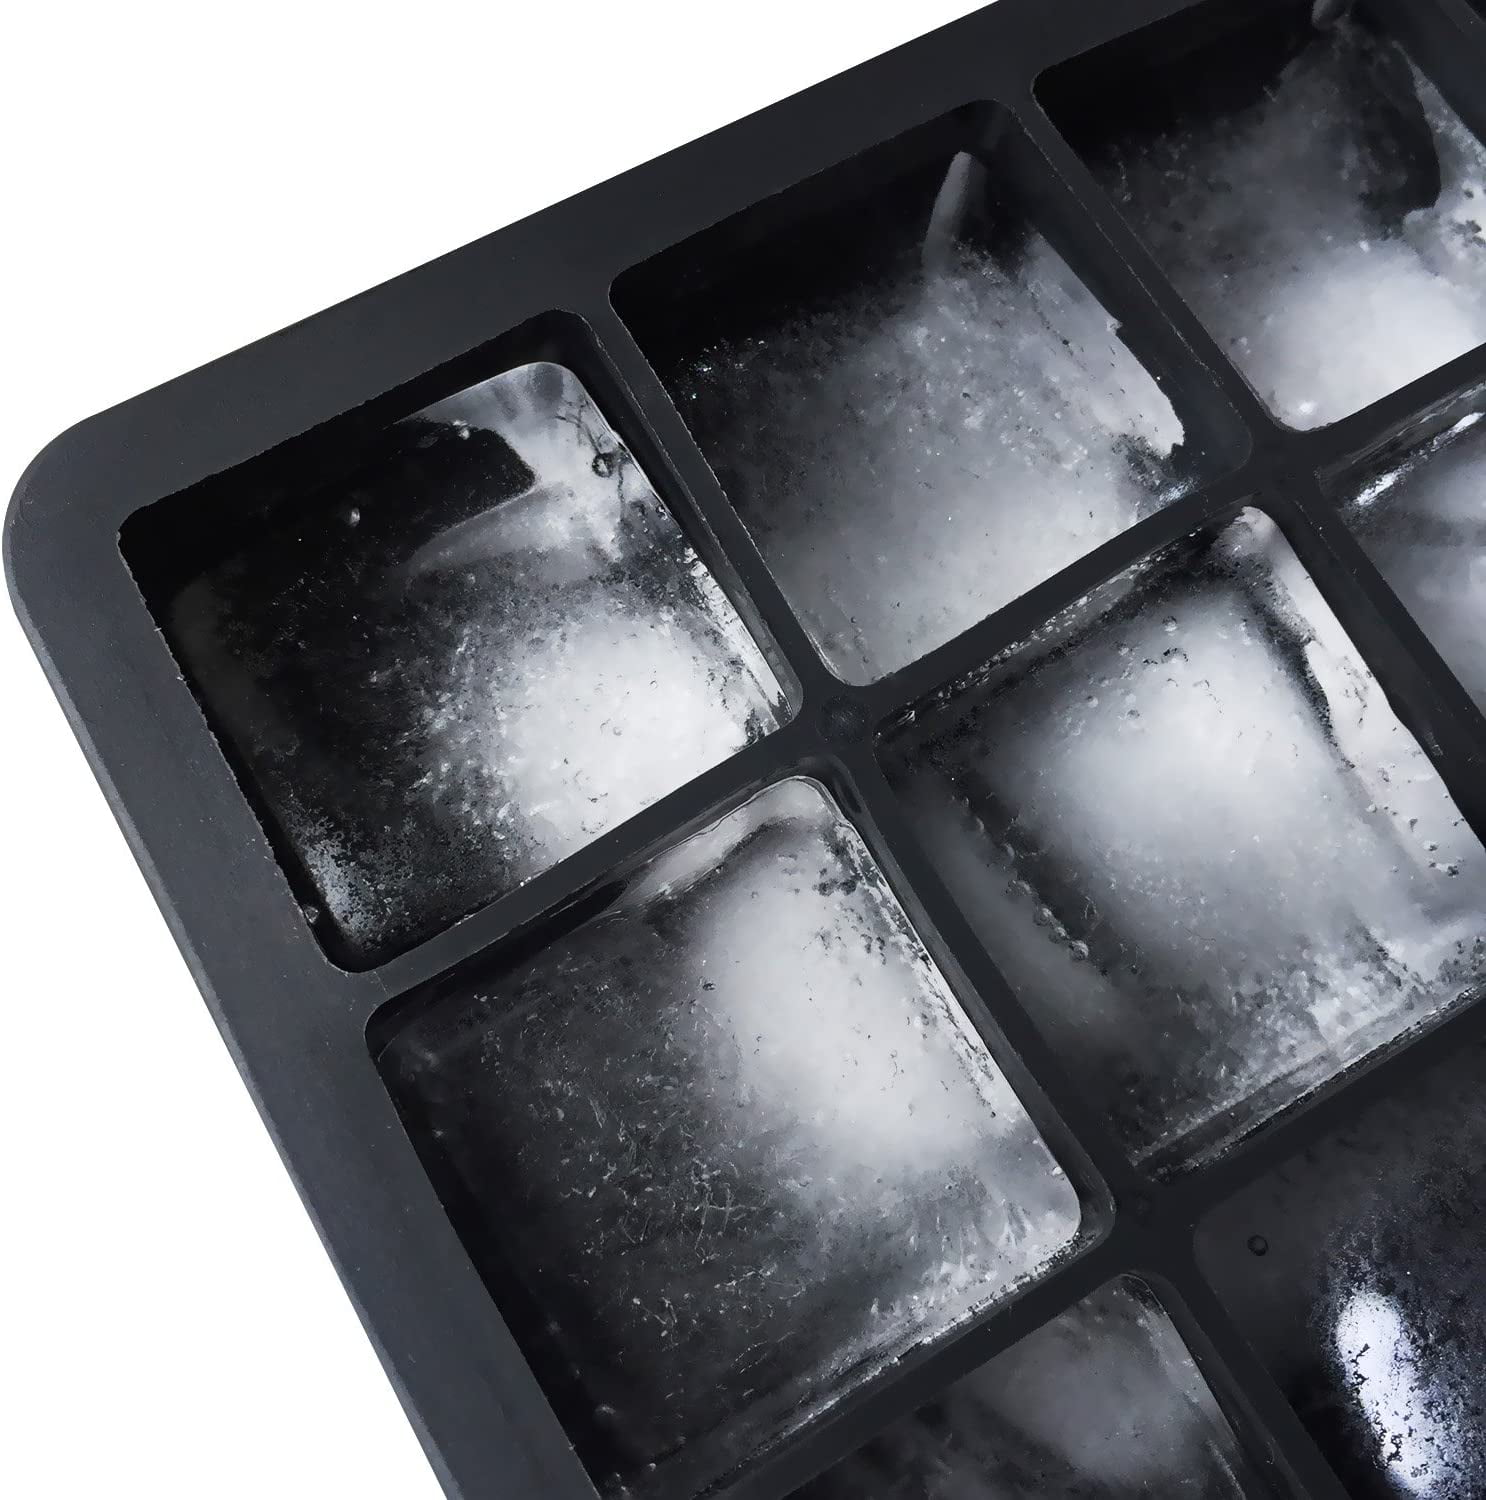 Ozera 2 Pack Silicone Ice Cube Trays Molds 15 Cavities Ice Tray for Whiskey and Cocktail Black - 15 Cavity